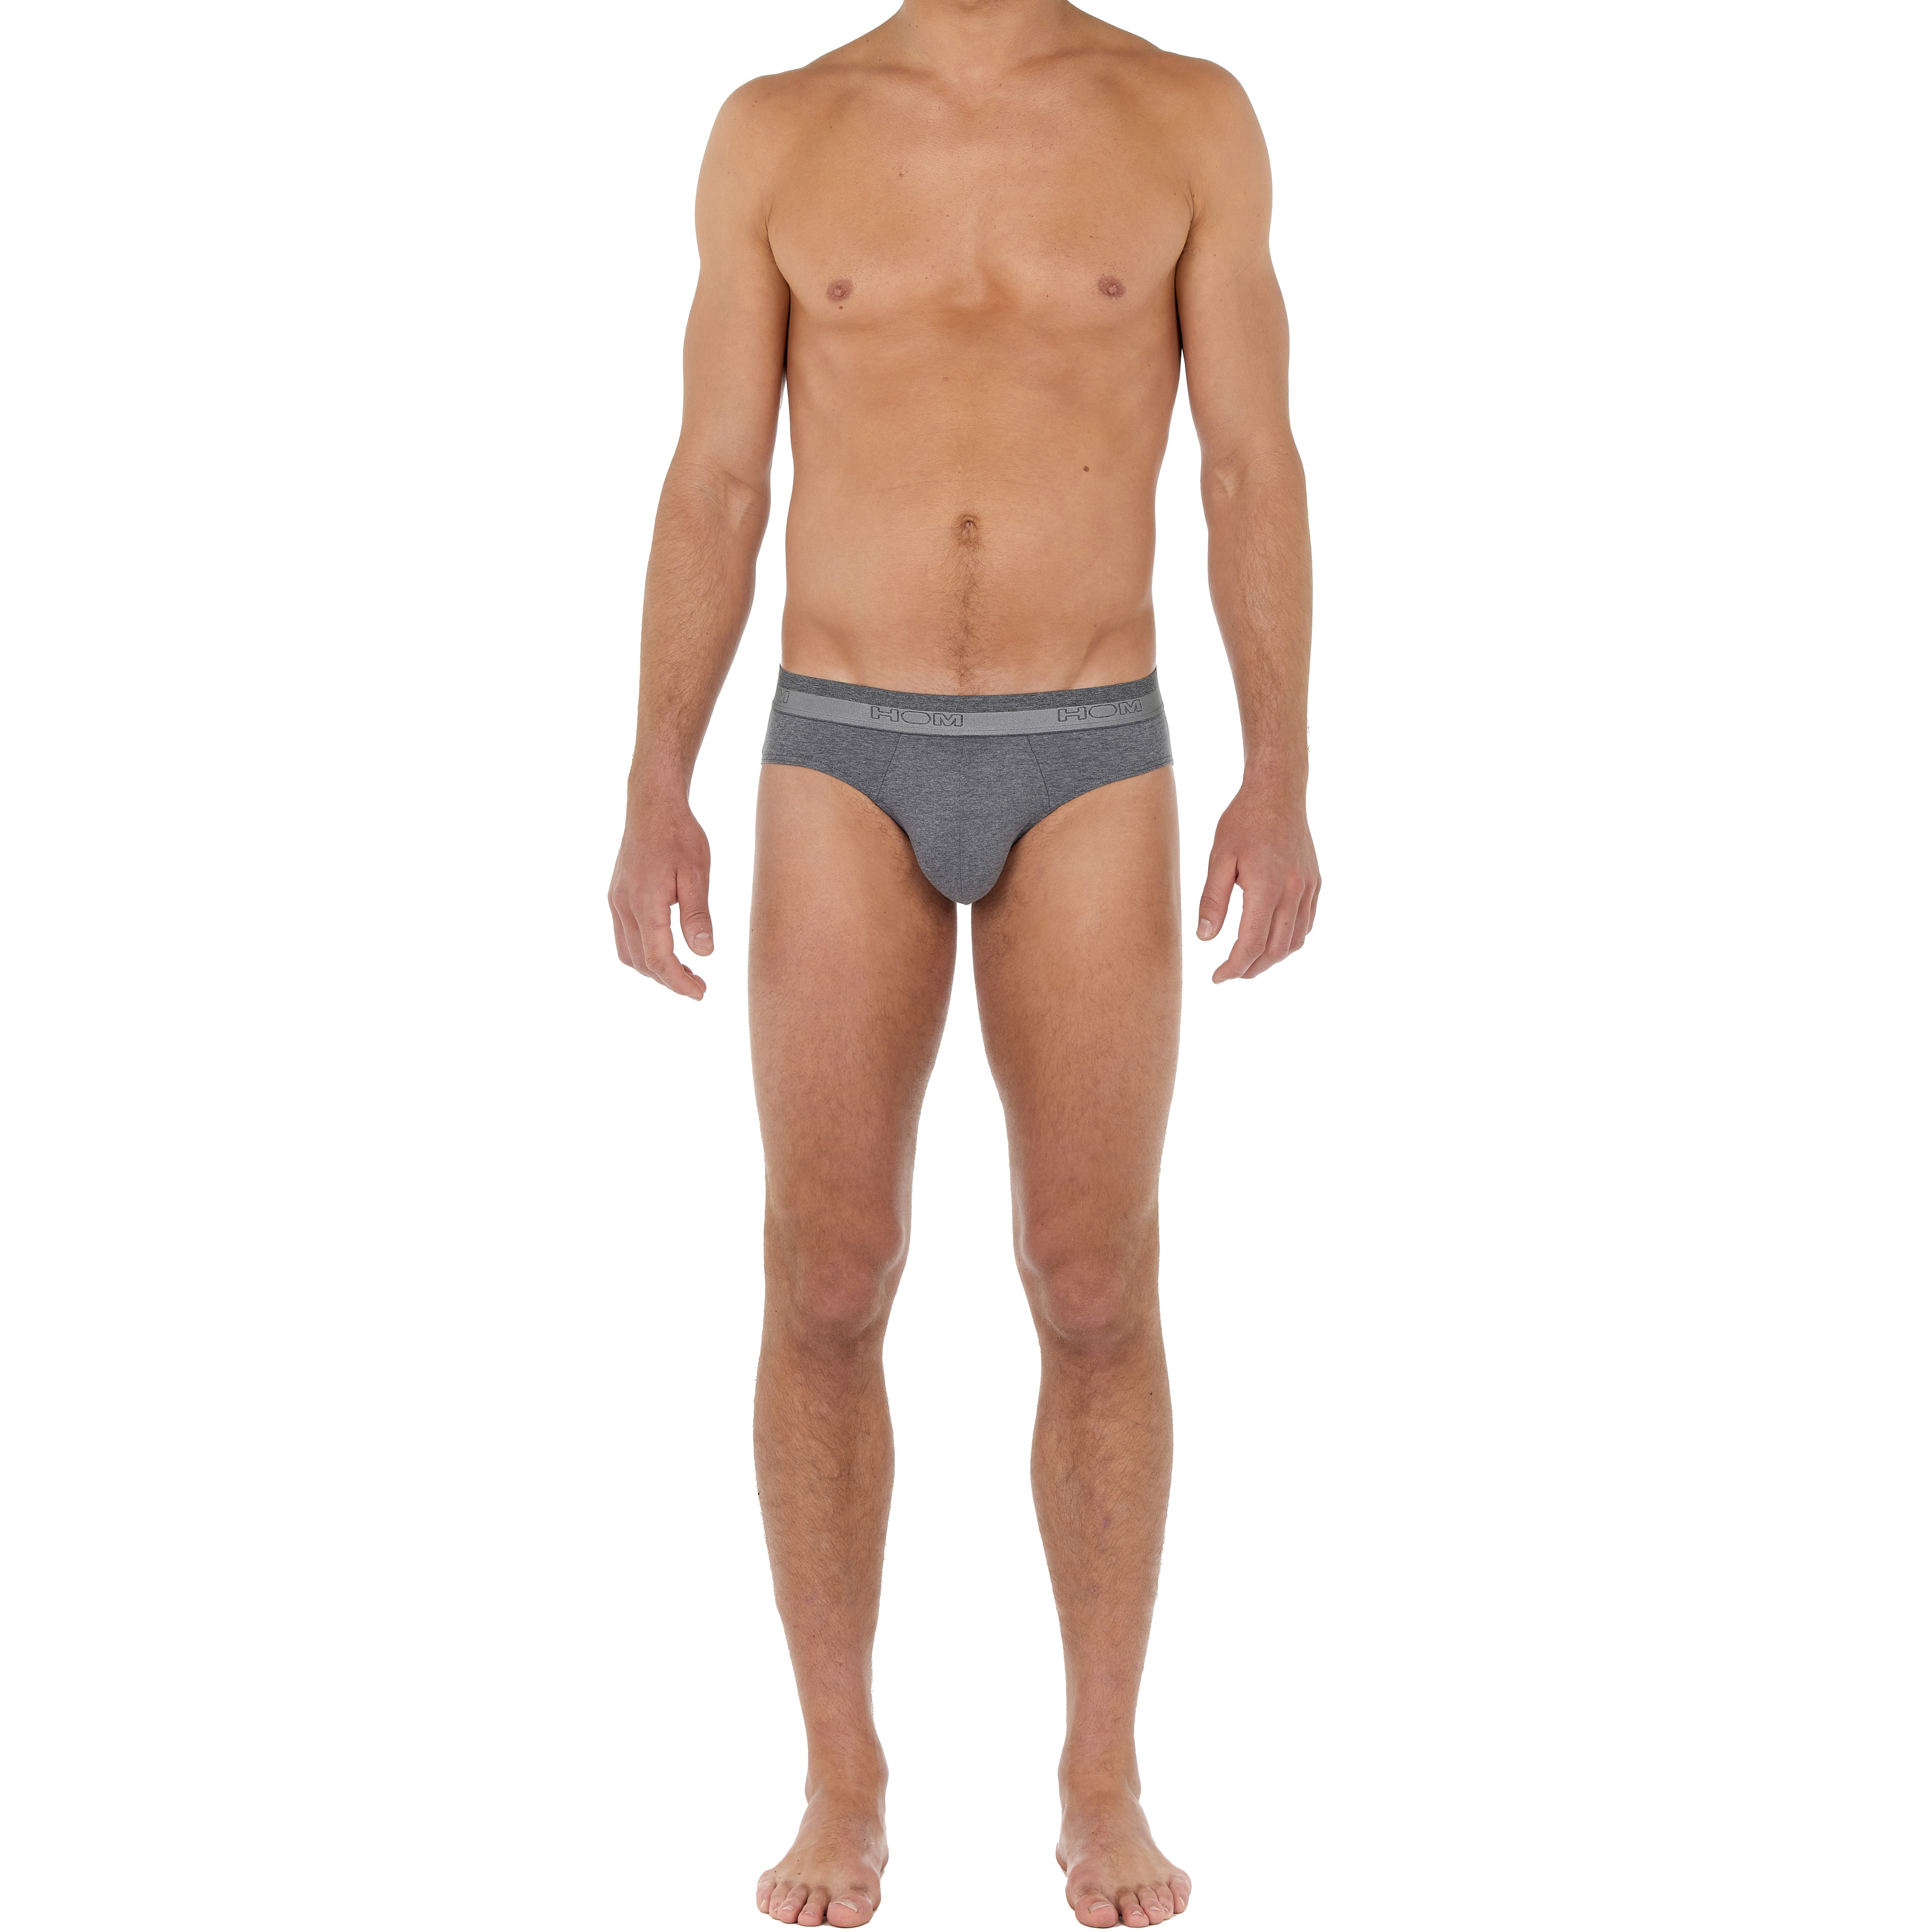 Brief CLASSIC grey - HOM : sale of Brief for men HOM. Purchase of B